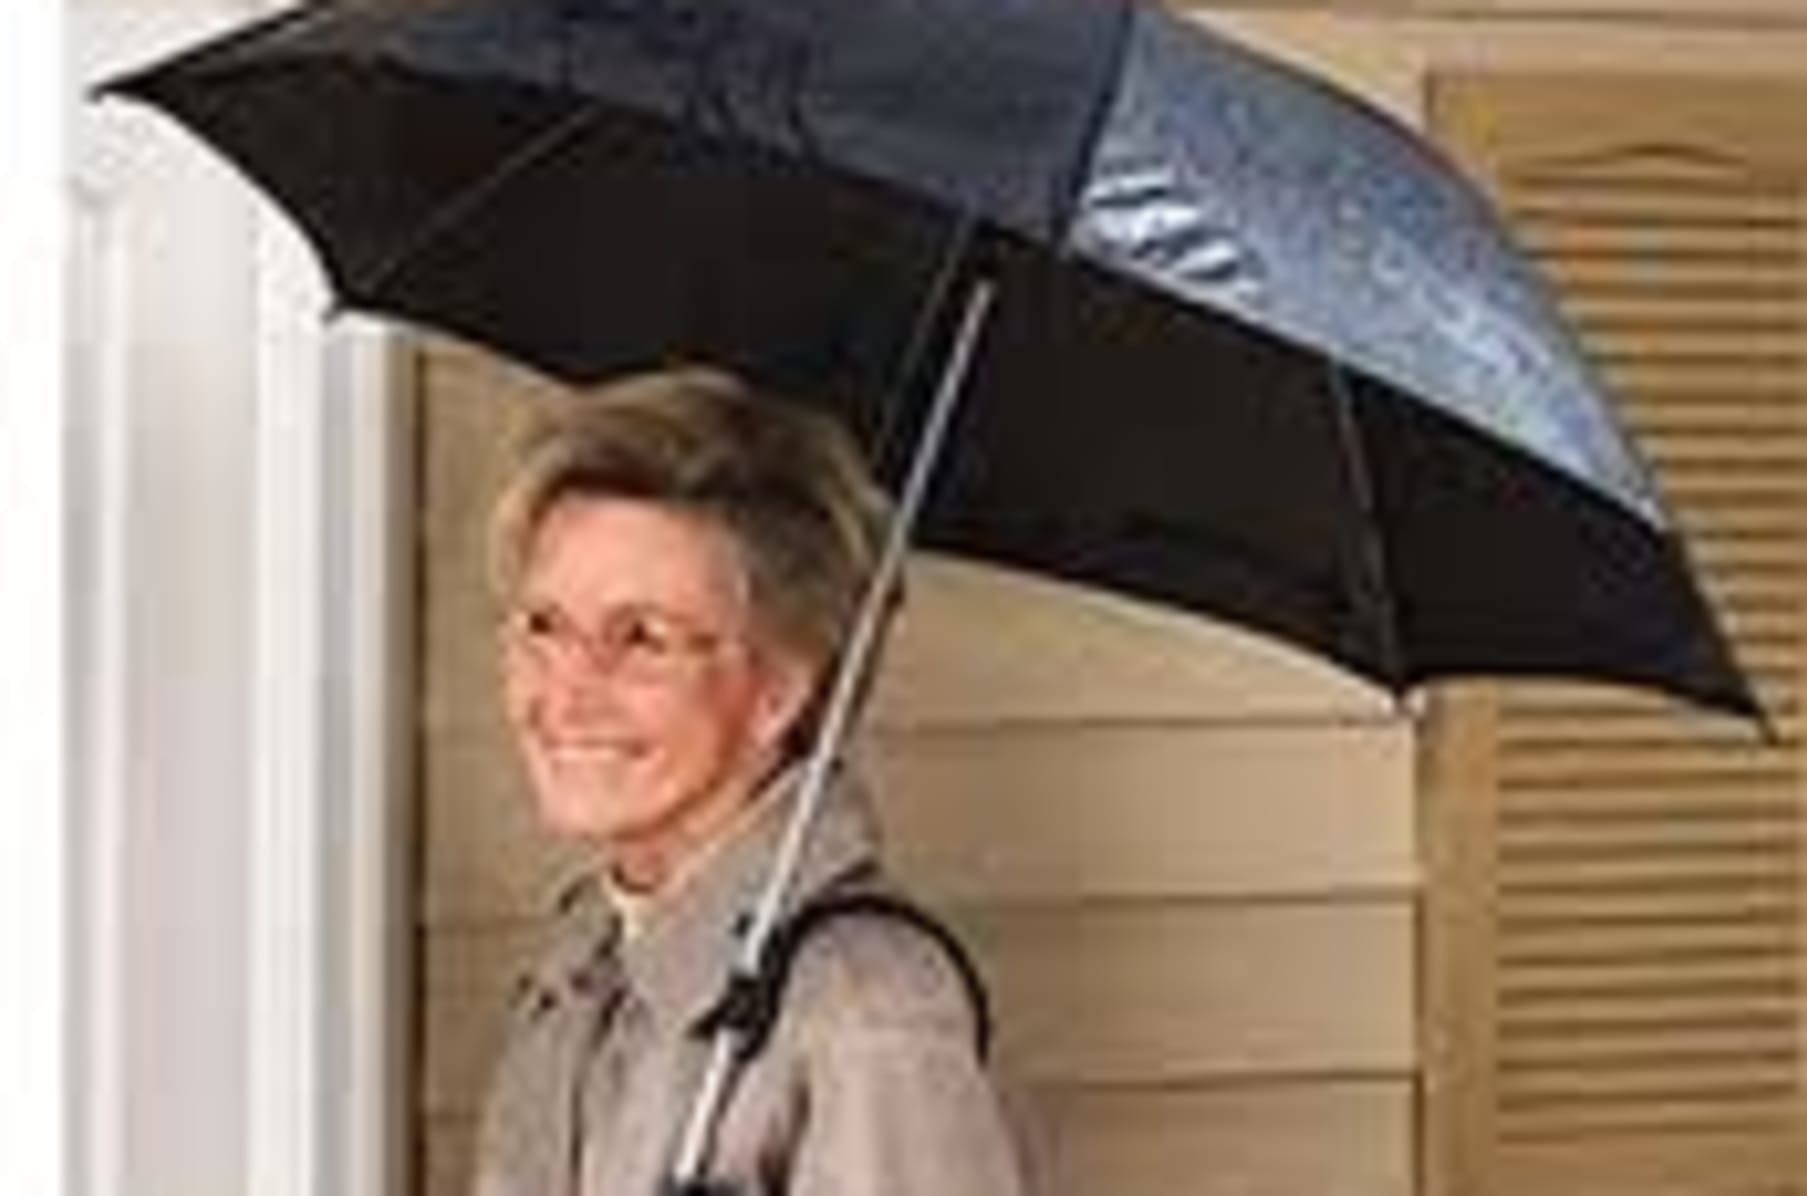 Nubrella Backpack Wearable Hands Free Umbrella all in one design | Rain-  Snow| UV Shade Sun Protection | Strong and Windproof |Hands-Free Patented